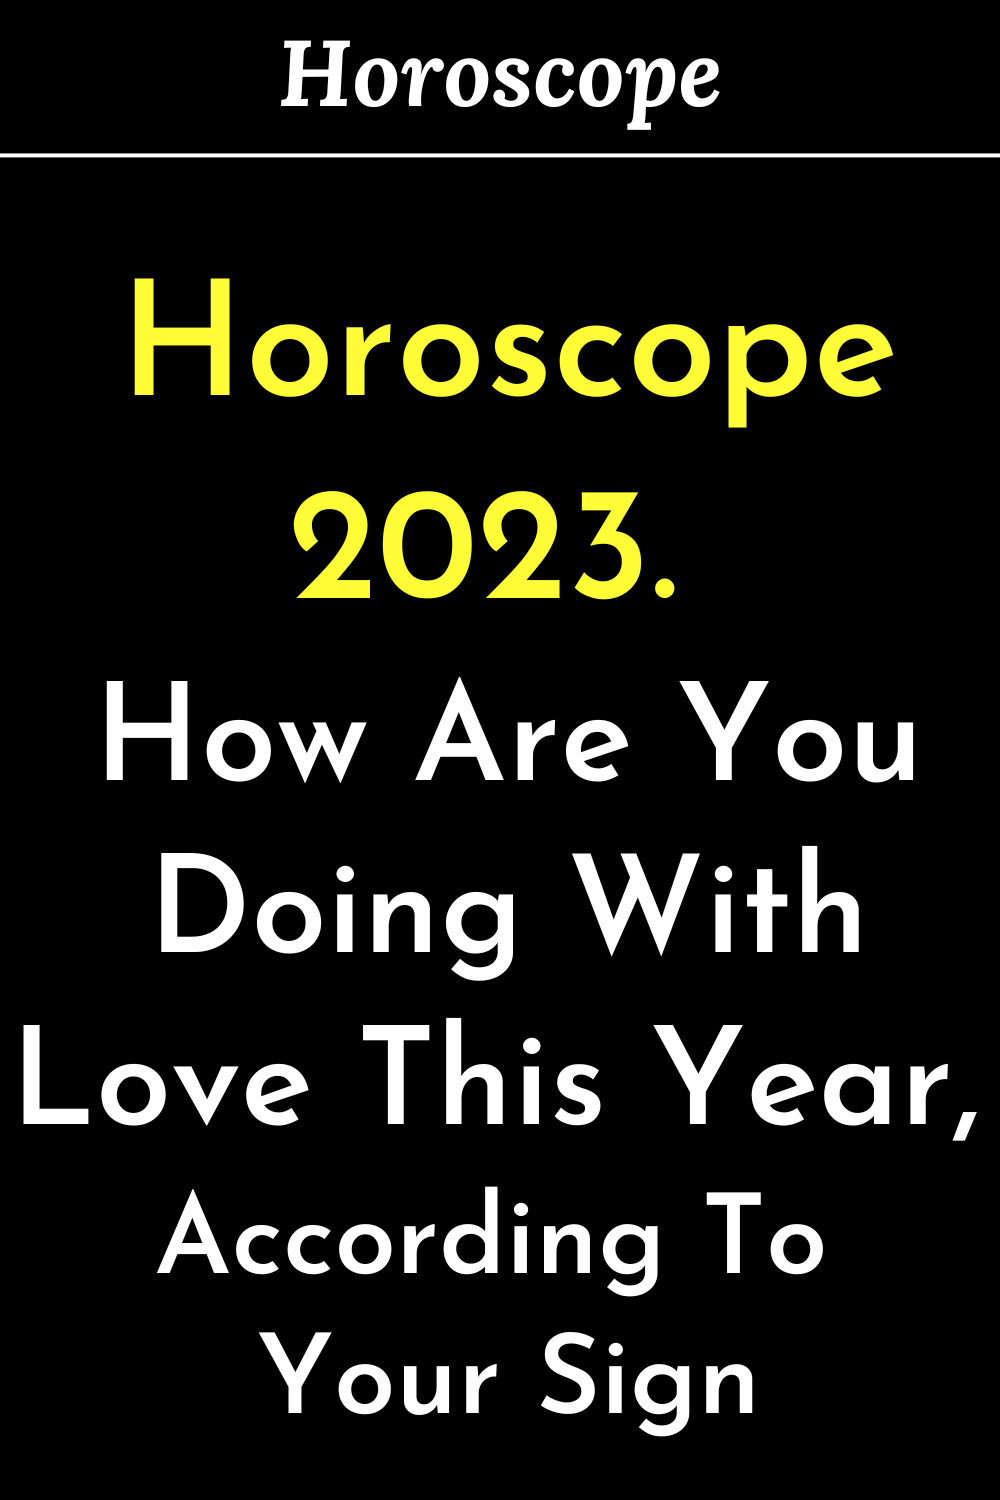 Horoscope 2023. How Are You Doing With Love This Year, According To Your Sign